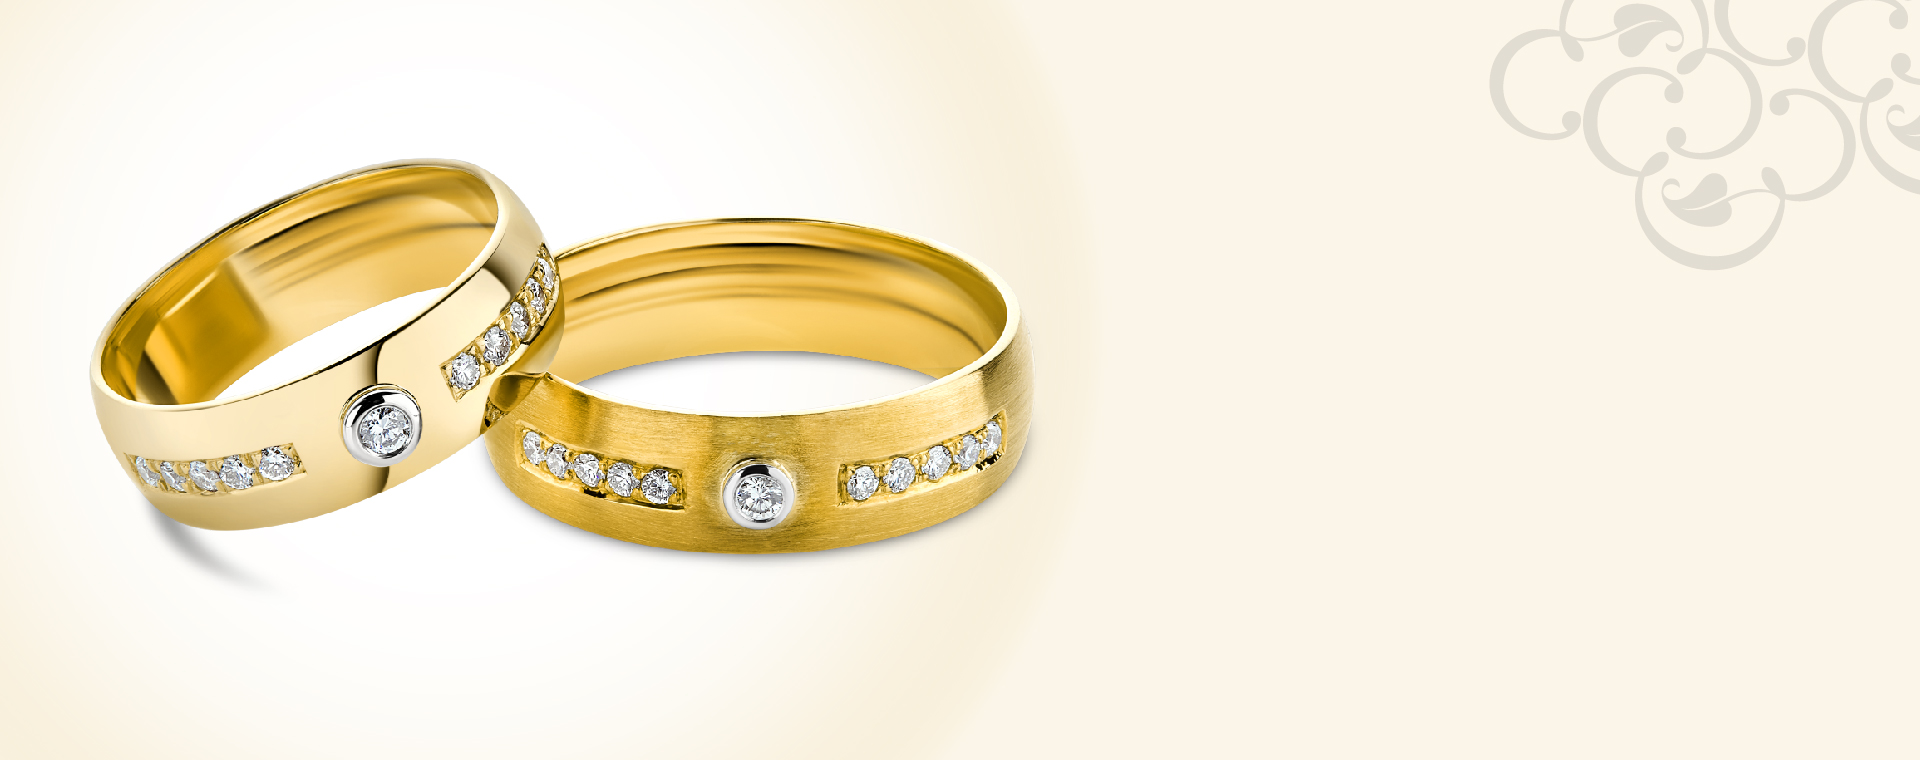 Dubai Expats Guide » Where to Buy Engagement and Wedding Rings in Dubai